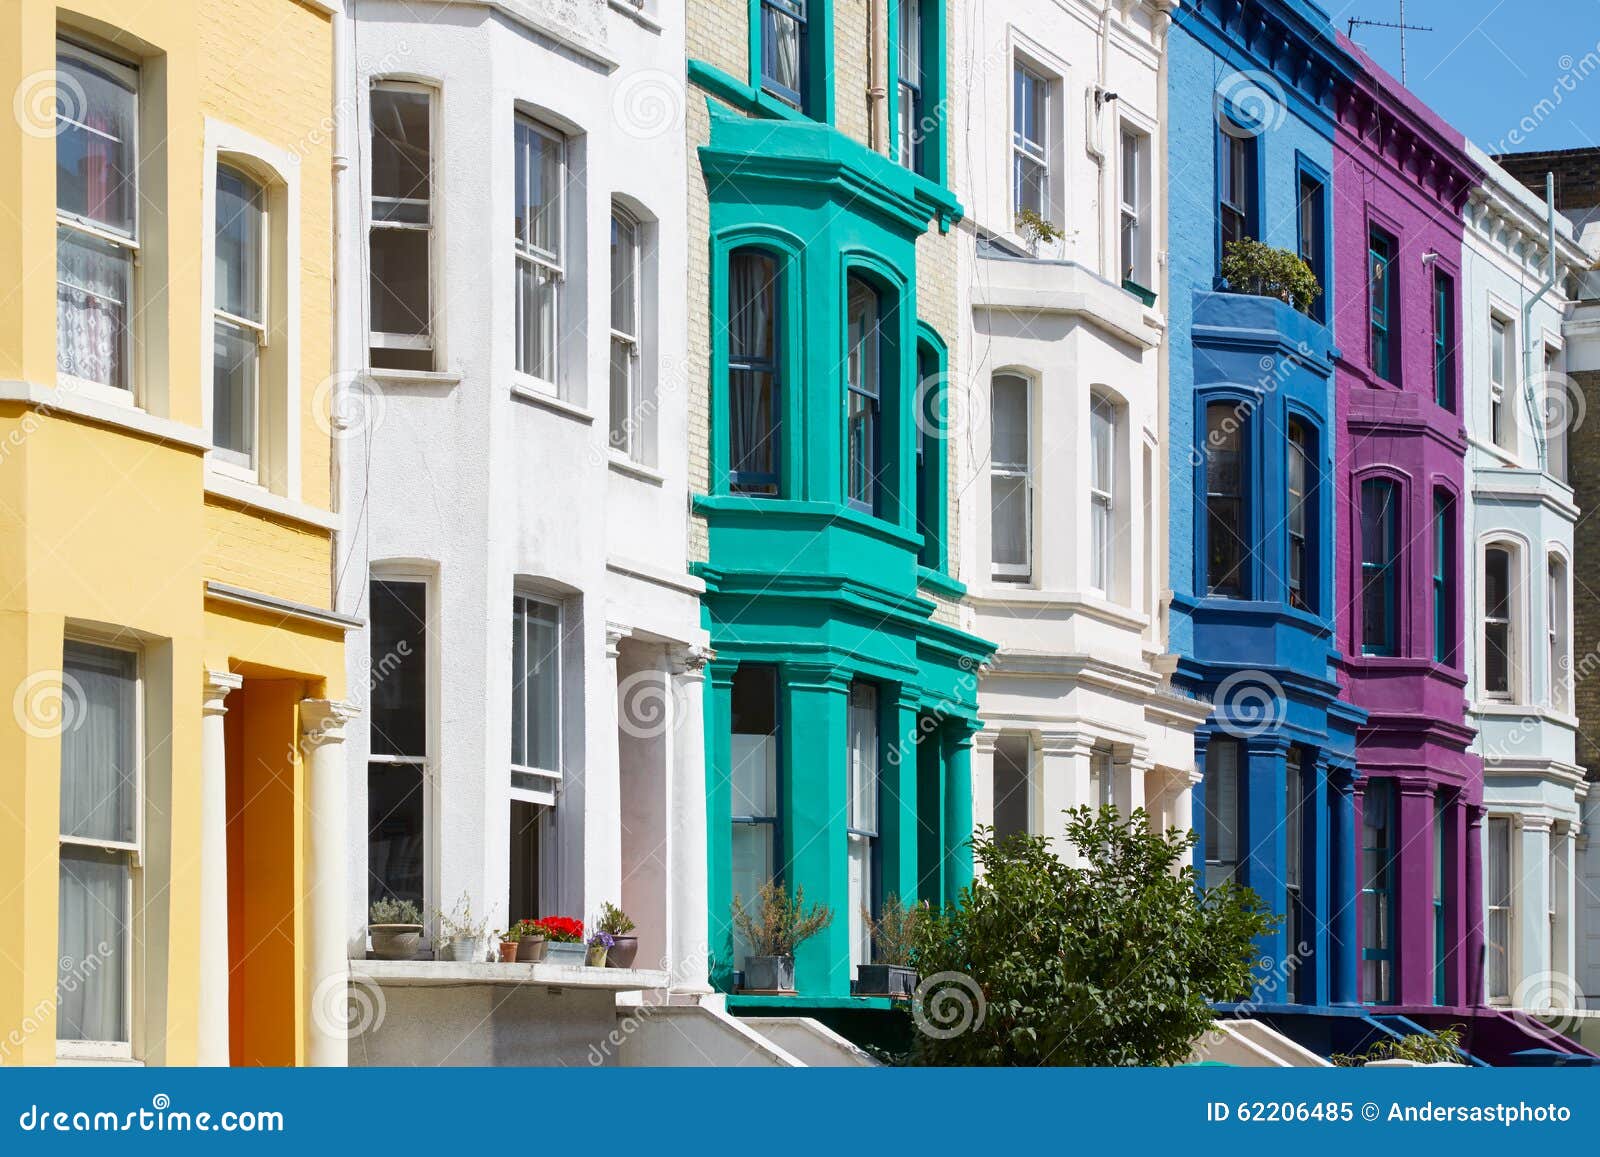 colorful english houses facades in london